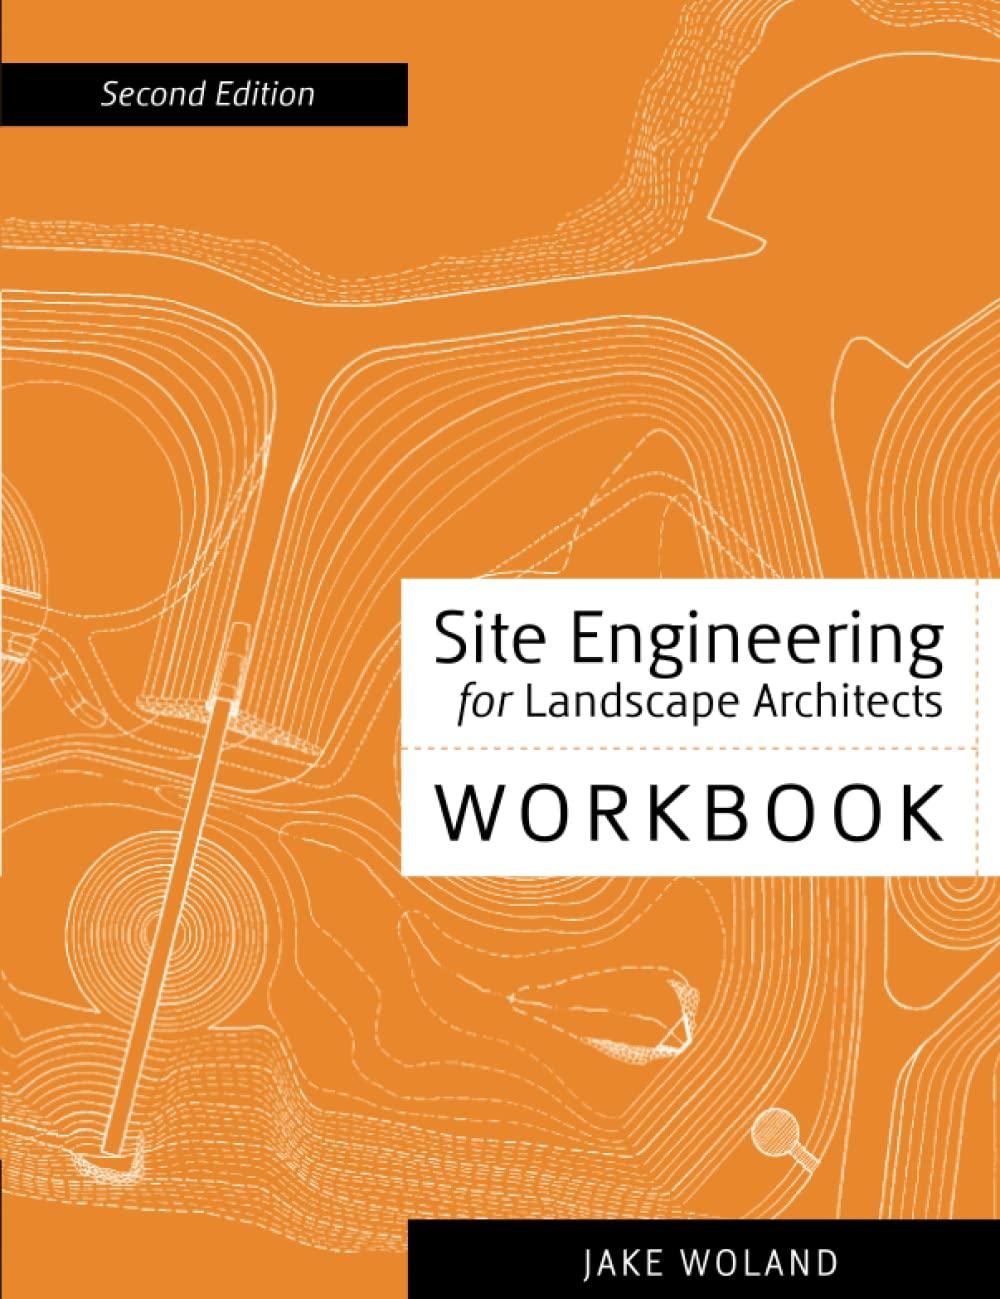 site engineering for landscape architects workbook 2nd edition jake woland 978-1118090855